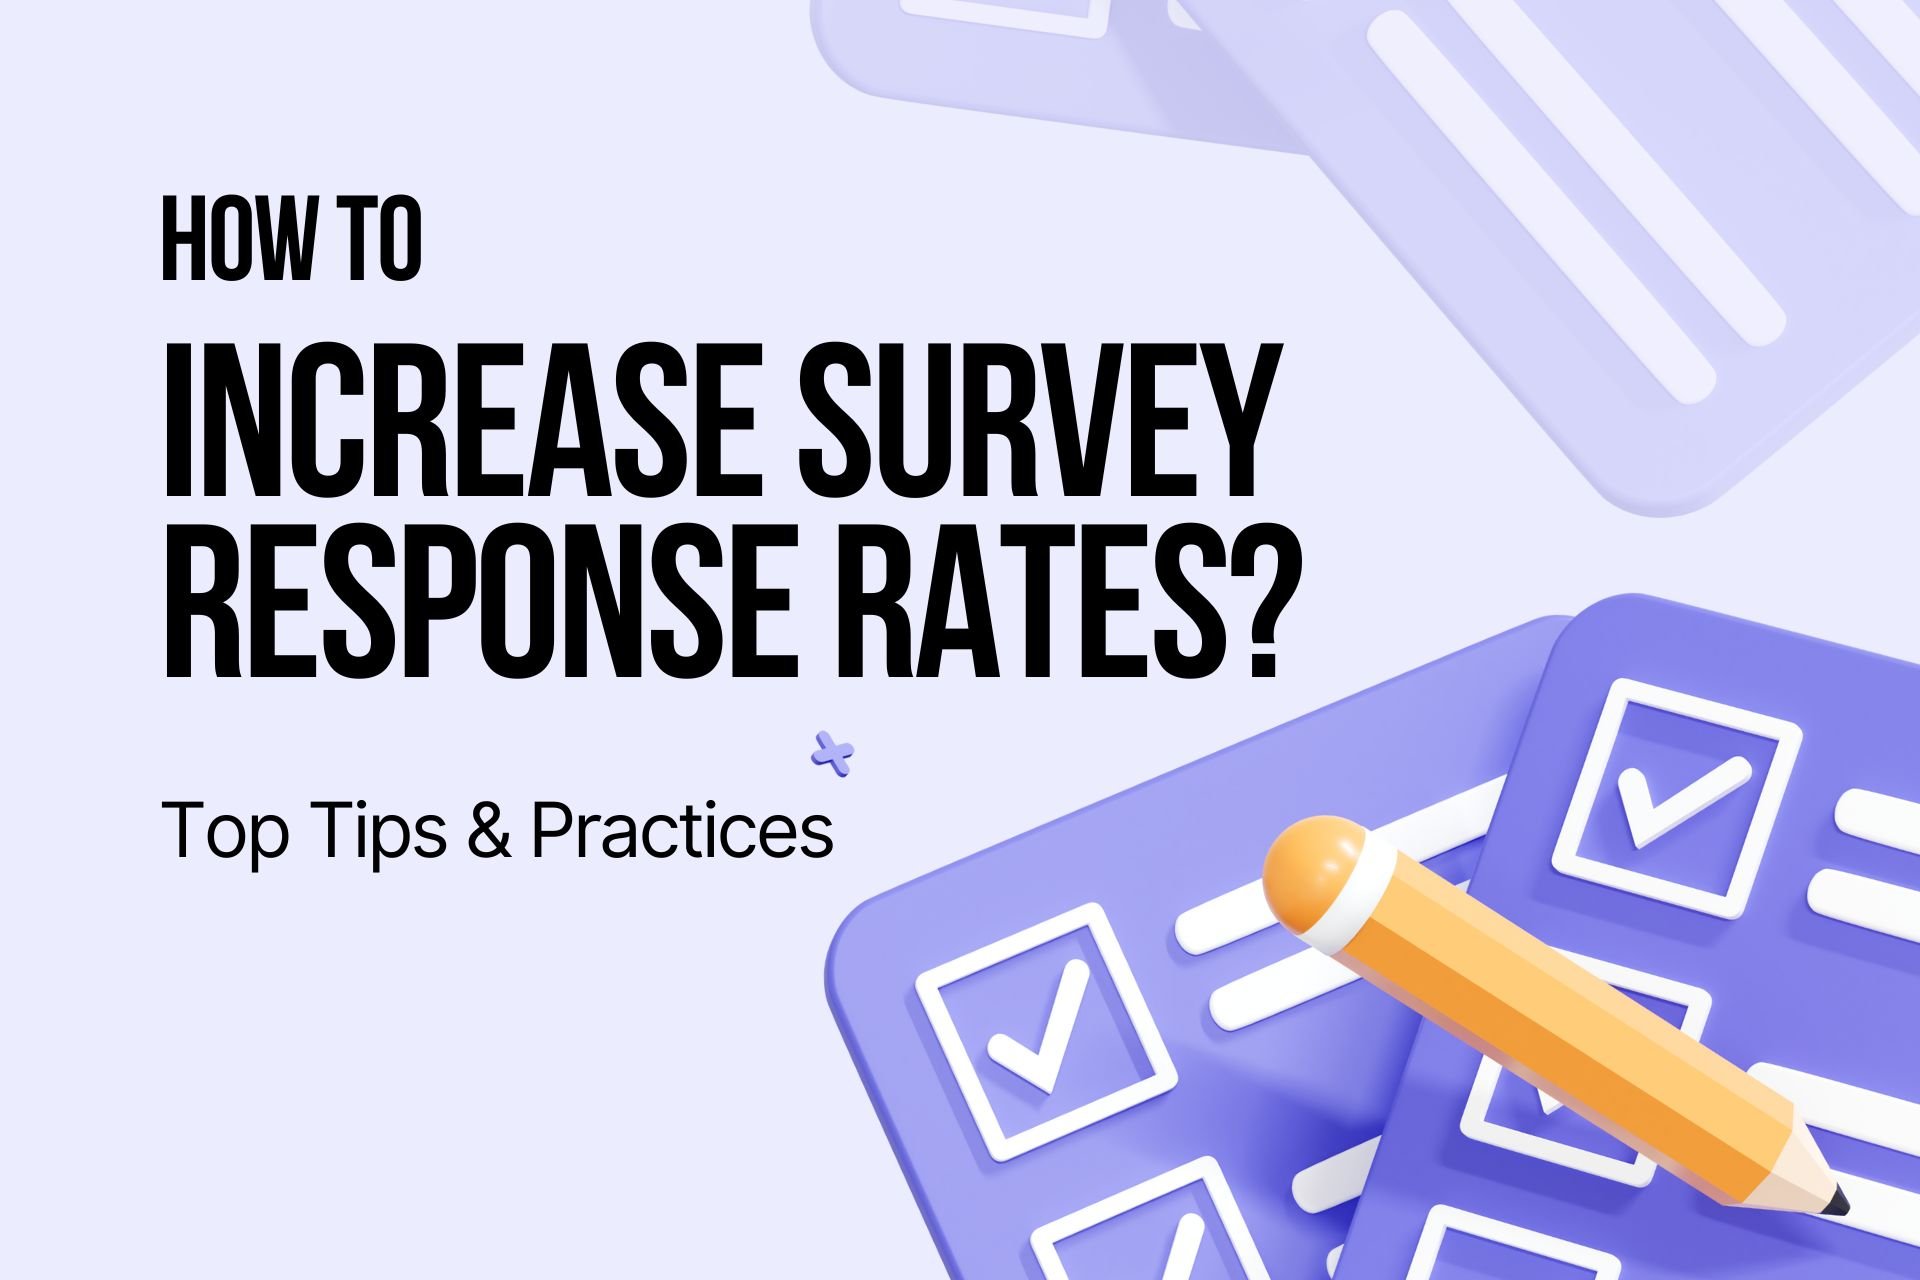 How to Increase Survey Response Rates? 13 Best Practices